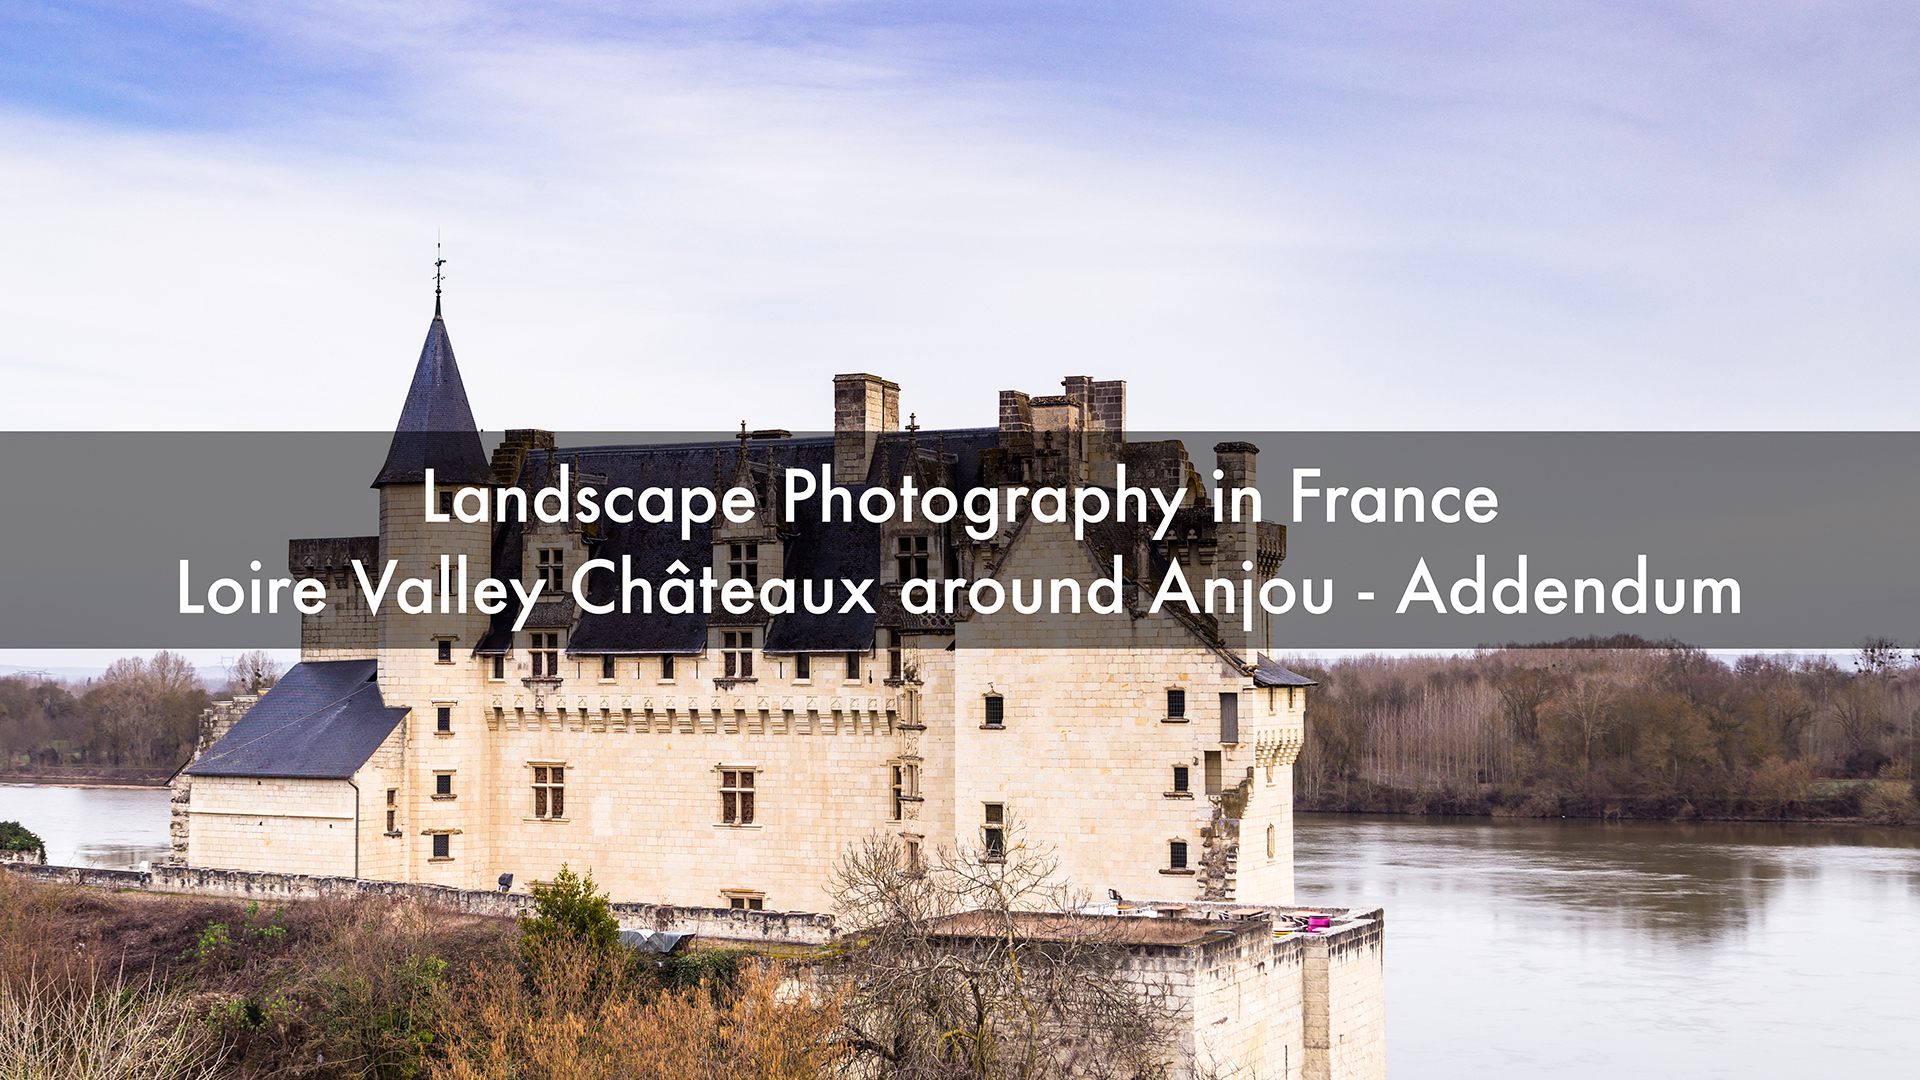 Loire Valley châteaux around Ajnou. Landscape and travel photography in France.